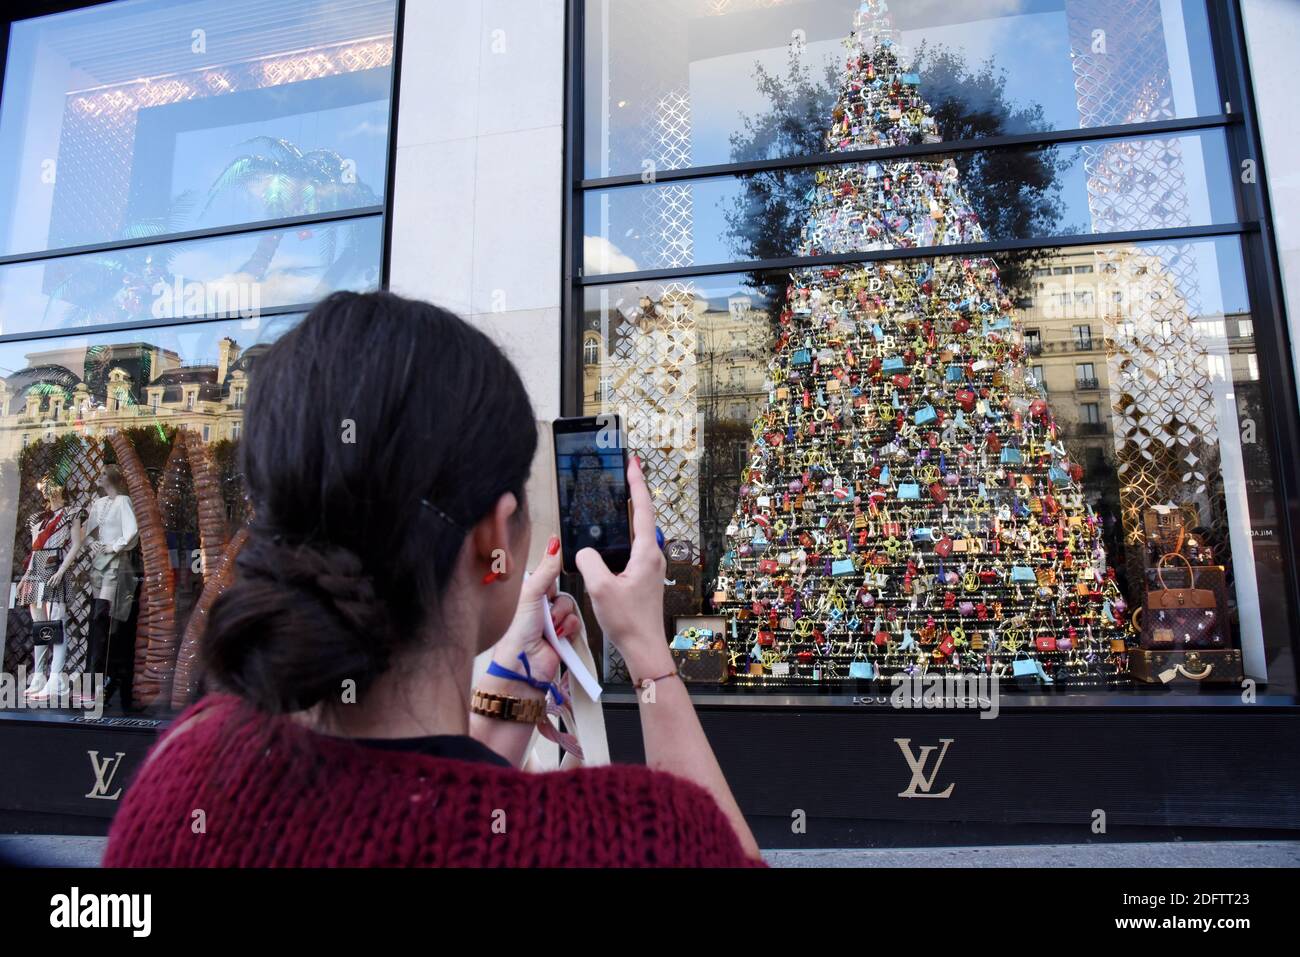 Louis Vuitton Christmas Tree Ornaments - 2018 Holiday Window Display